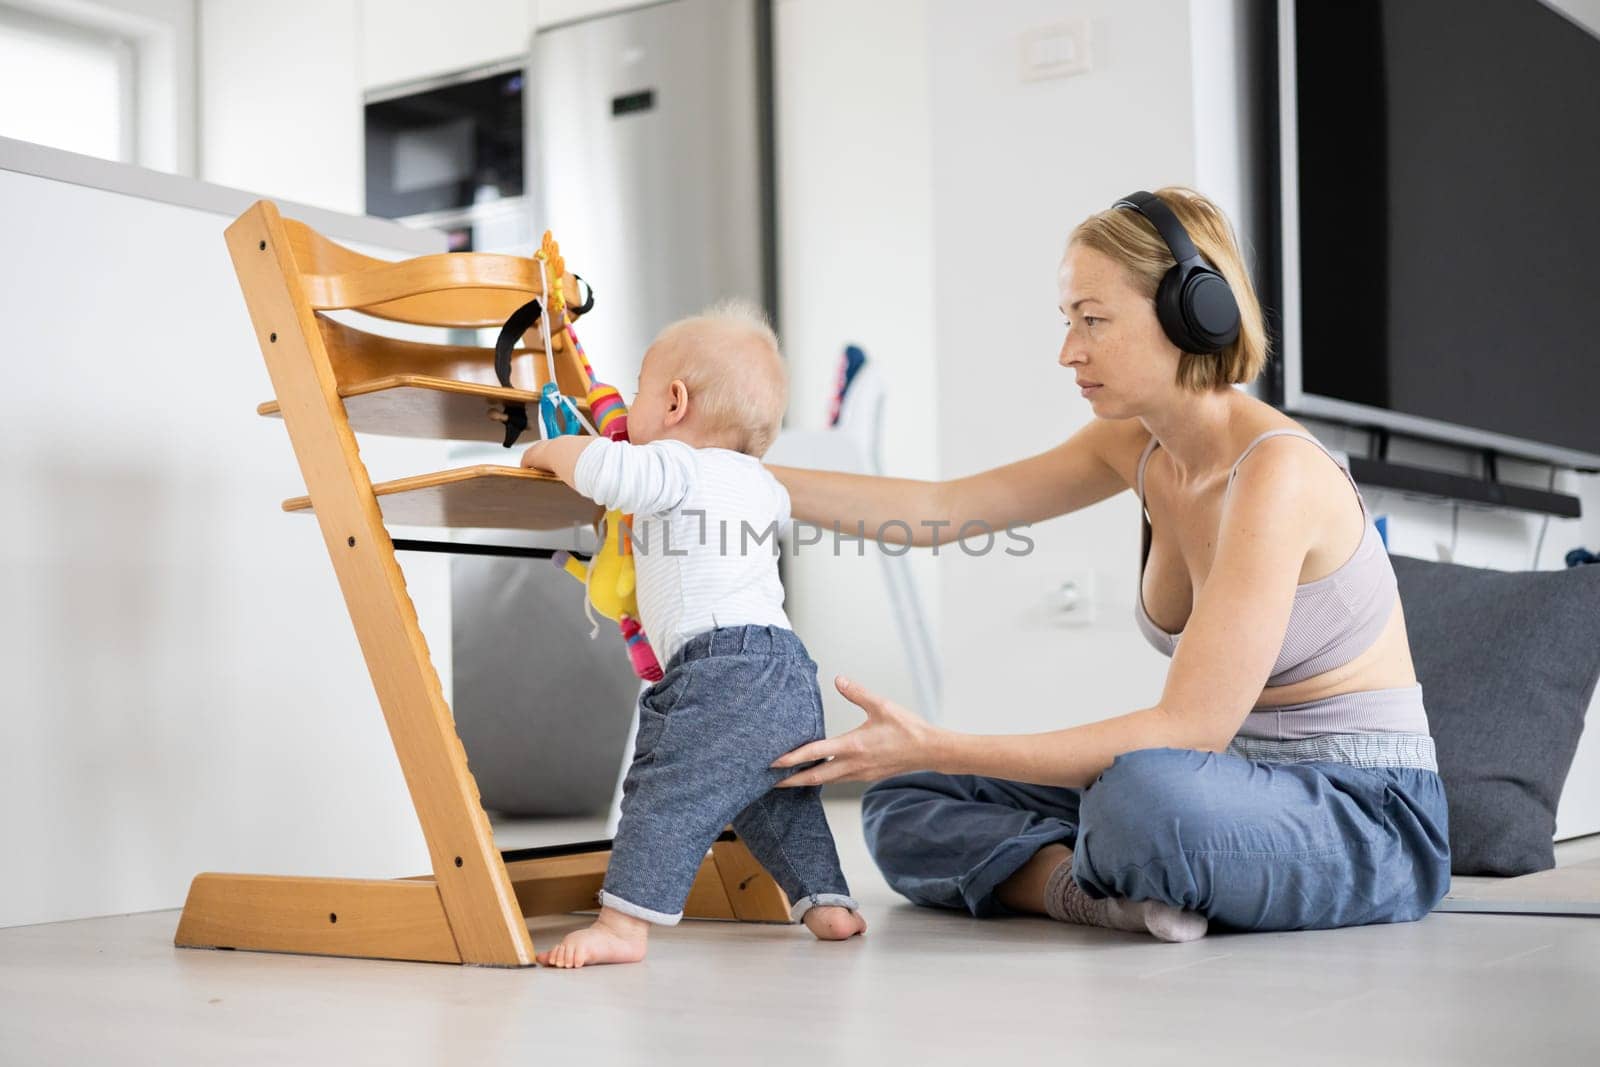 Women's multitasking. Mother sitting on floor playing with her baby boy watching and suppervising his first steps while listening to podcast on wireless headphones